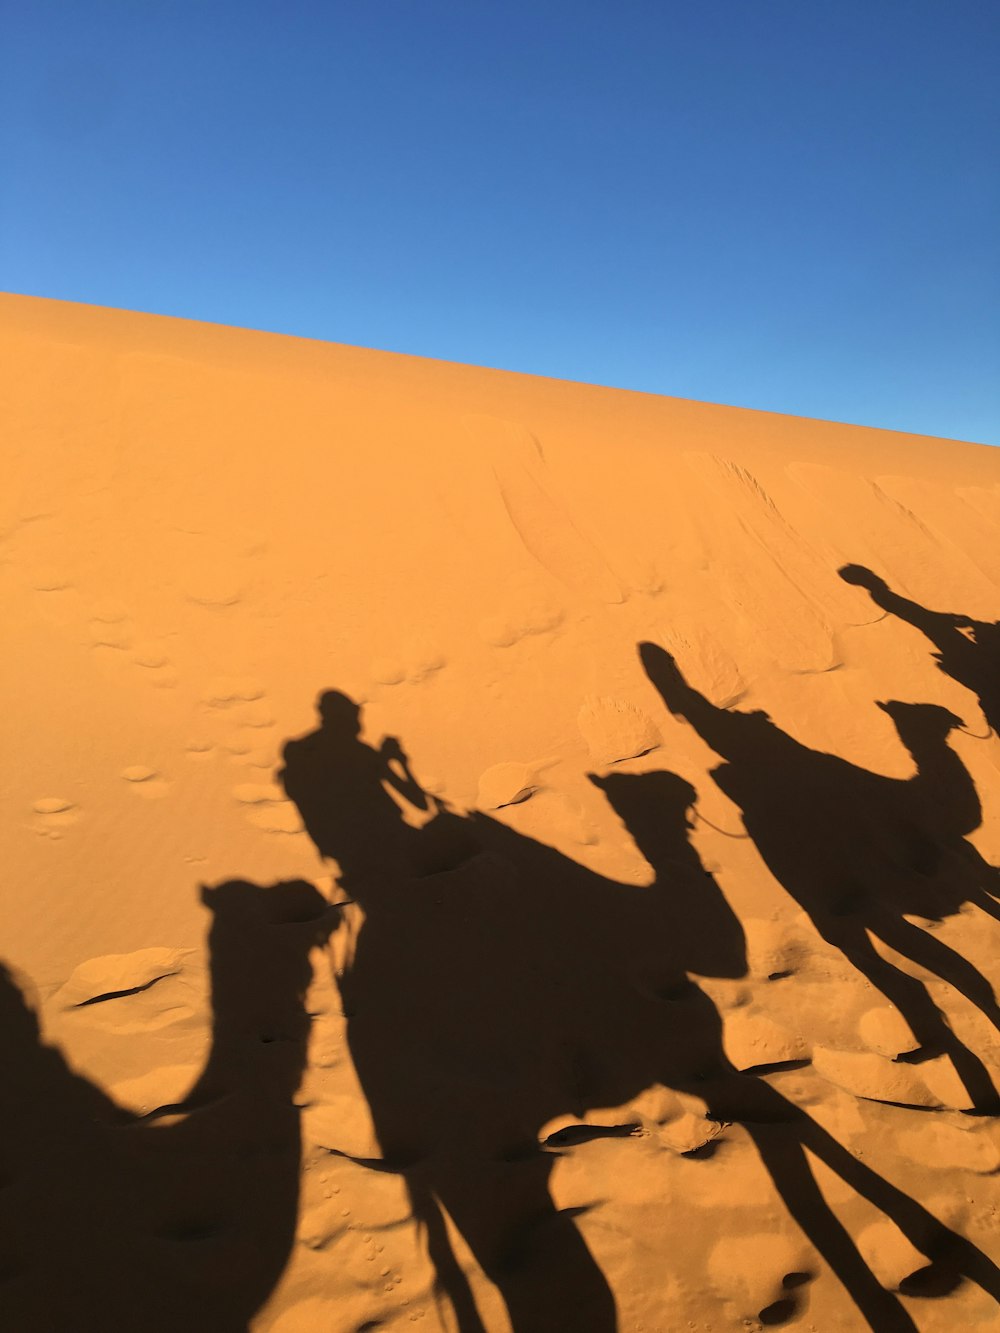 silhouette of four person riding camel on desert during daytime